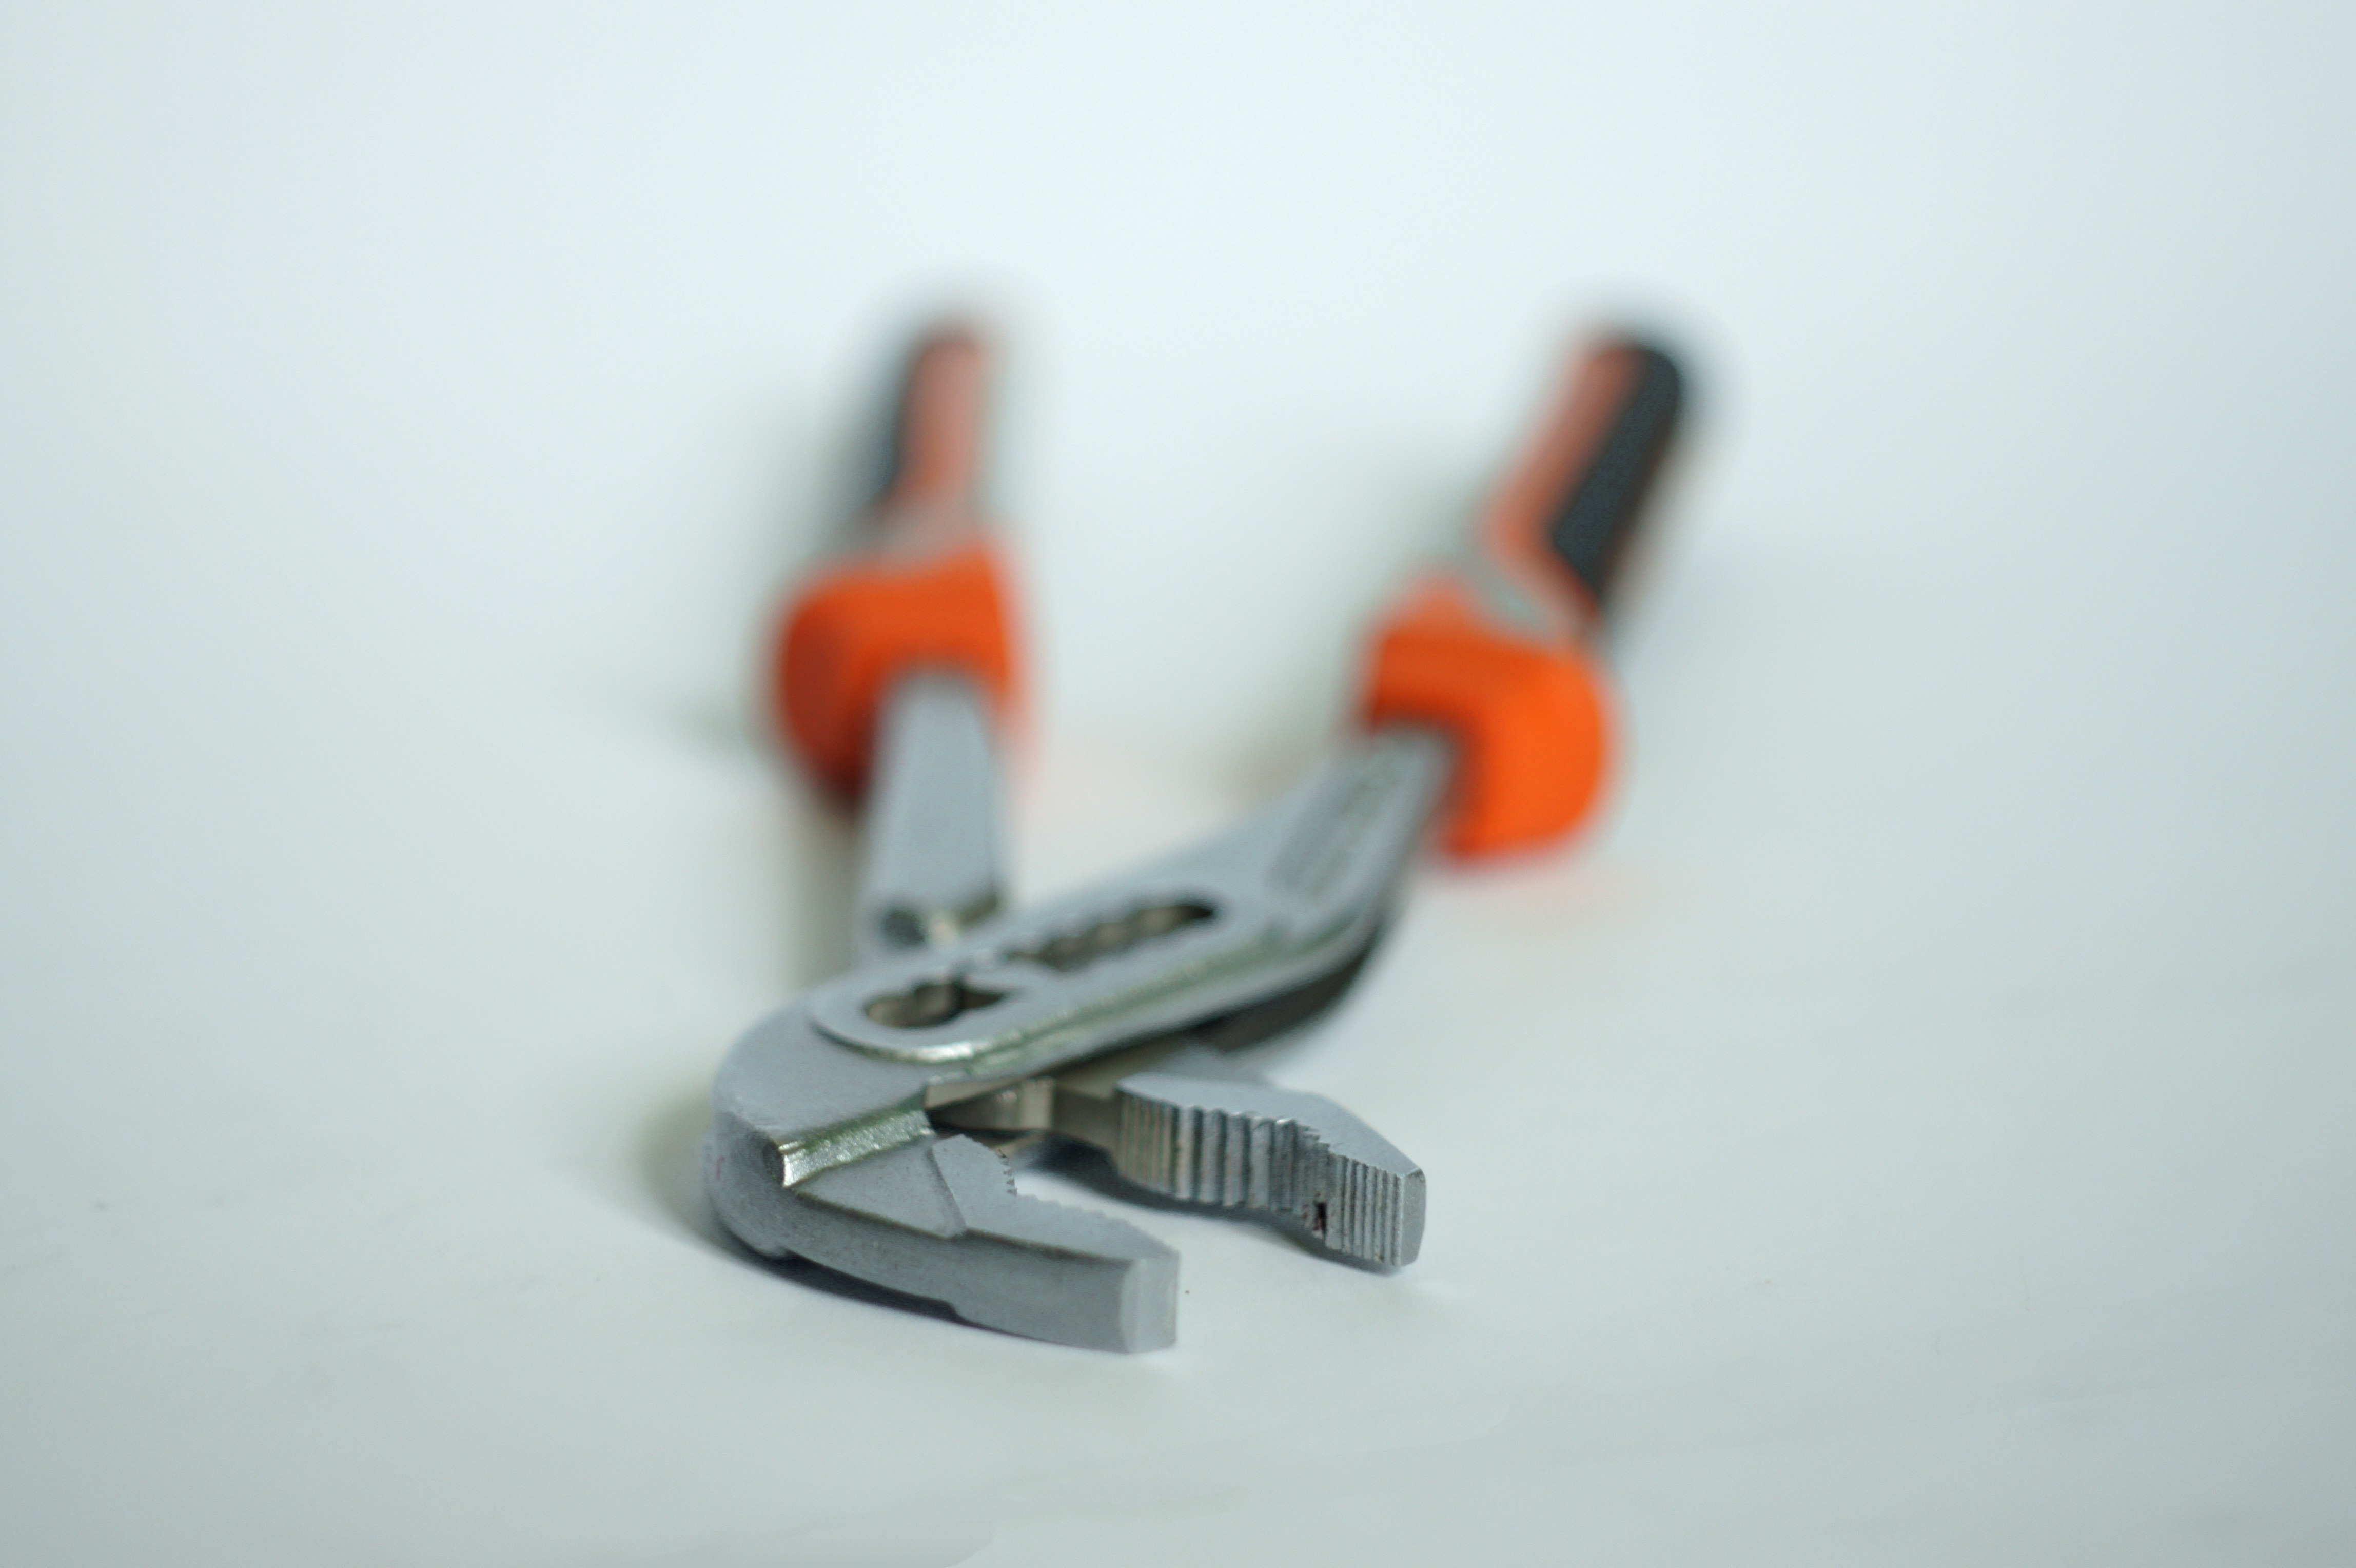 Pincers Nippers Pliers free image download